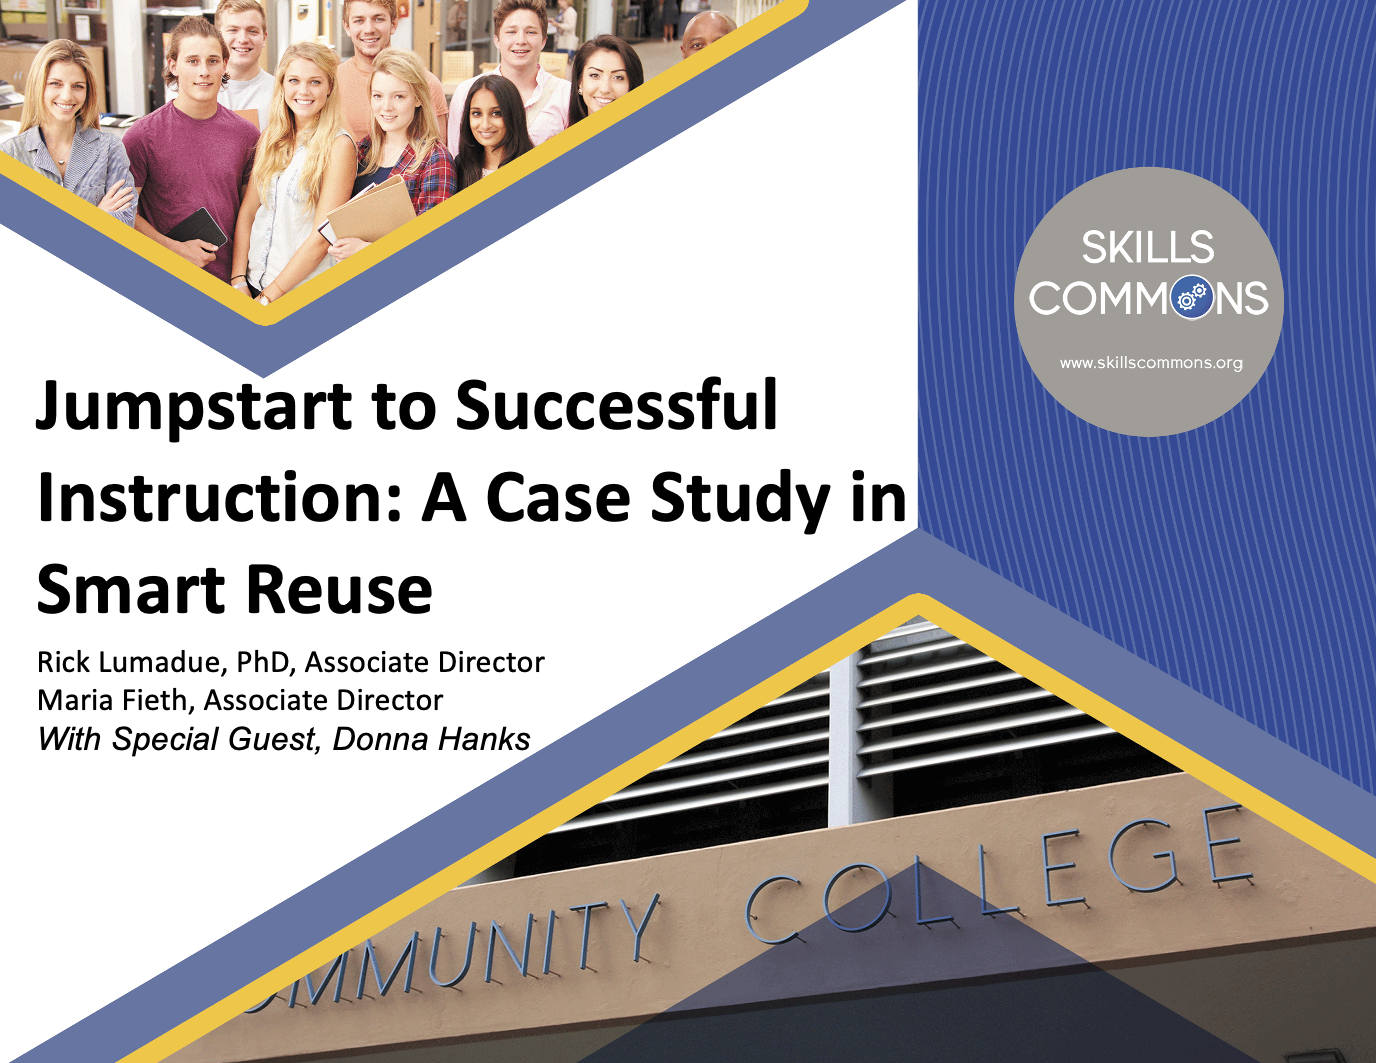 Jumpstart to Successful Instruction: A Case Study in Smart Reuse Rick Lumadue, PhD, Associate Director Maria Fieth, Associate Director With Special Guest, Donna Hanks